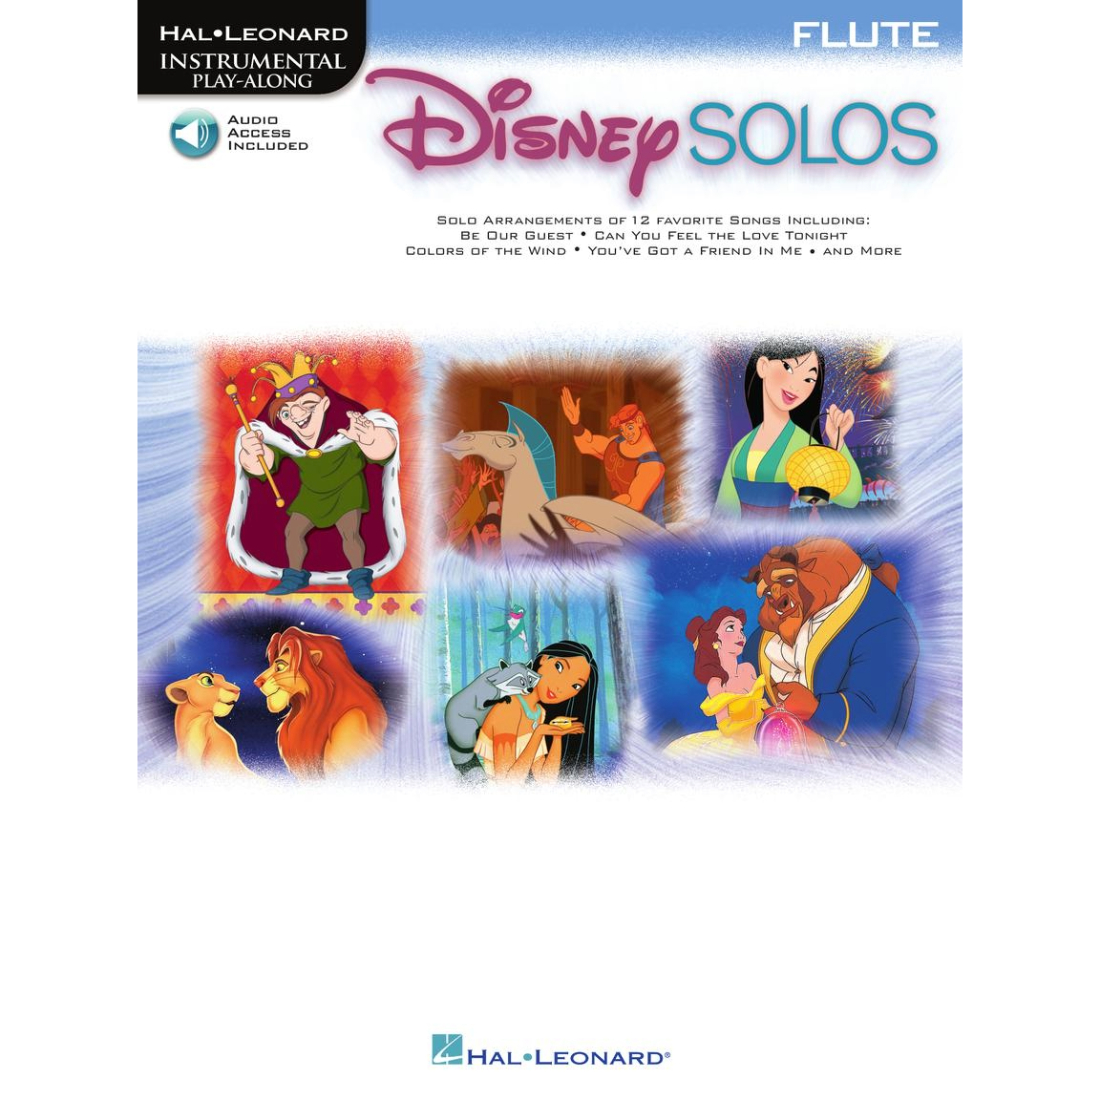 White cover with images from Disney movies, titled Disney solos